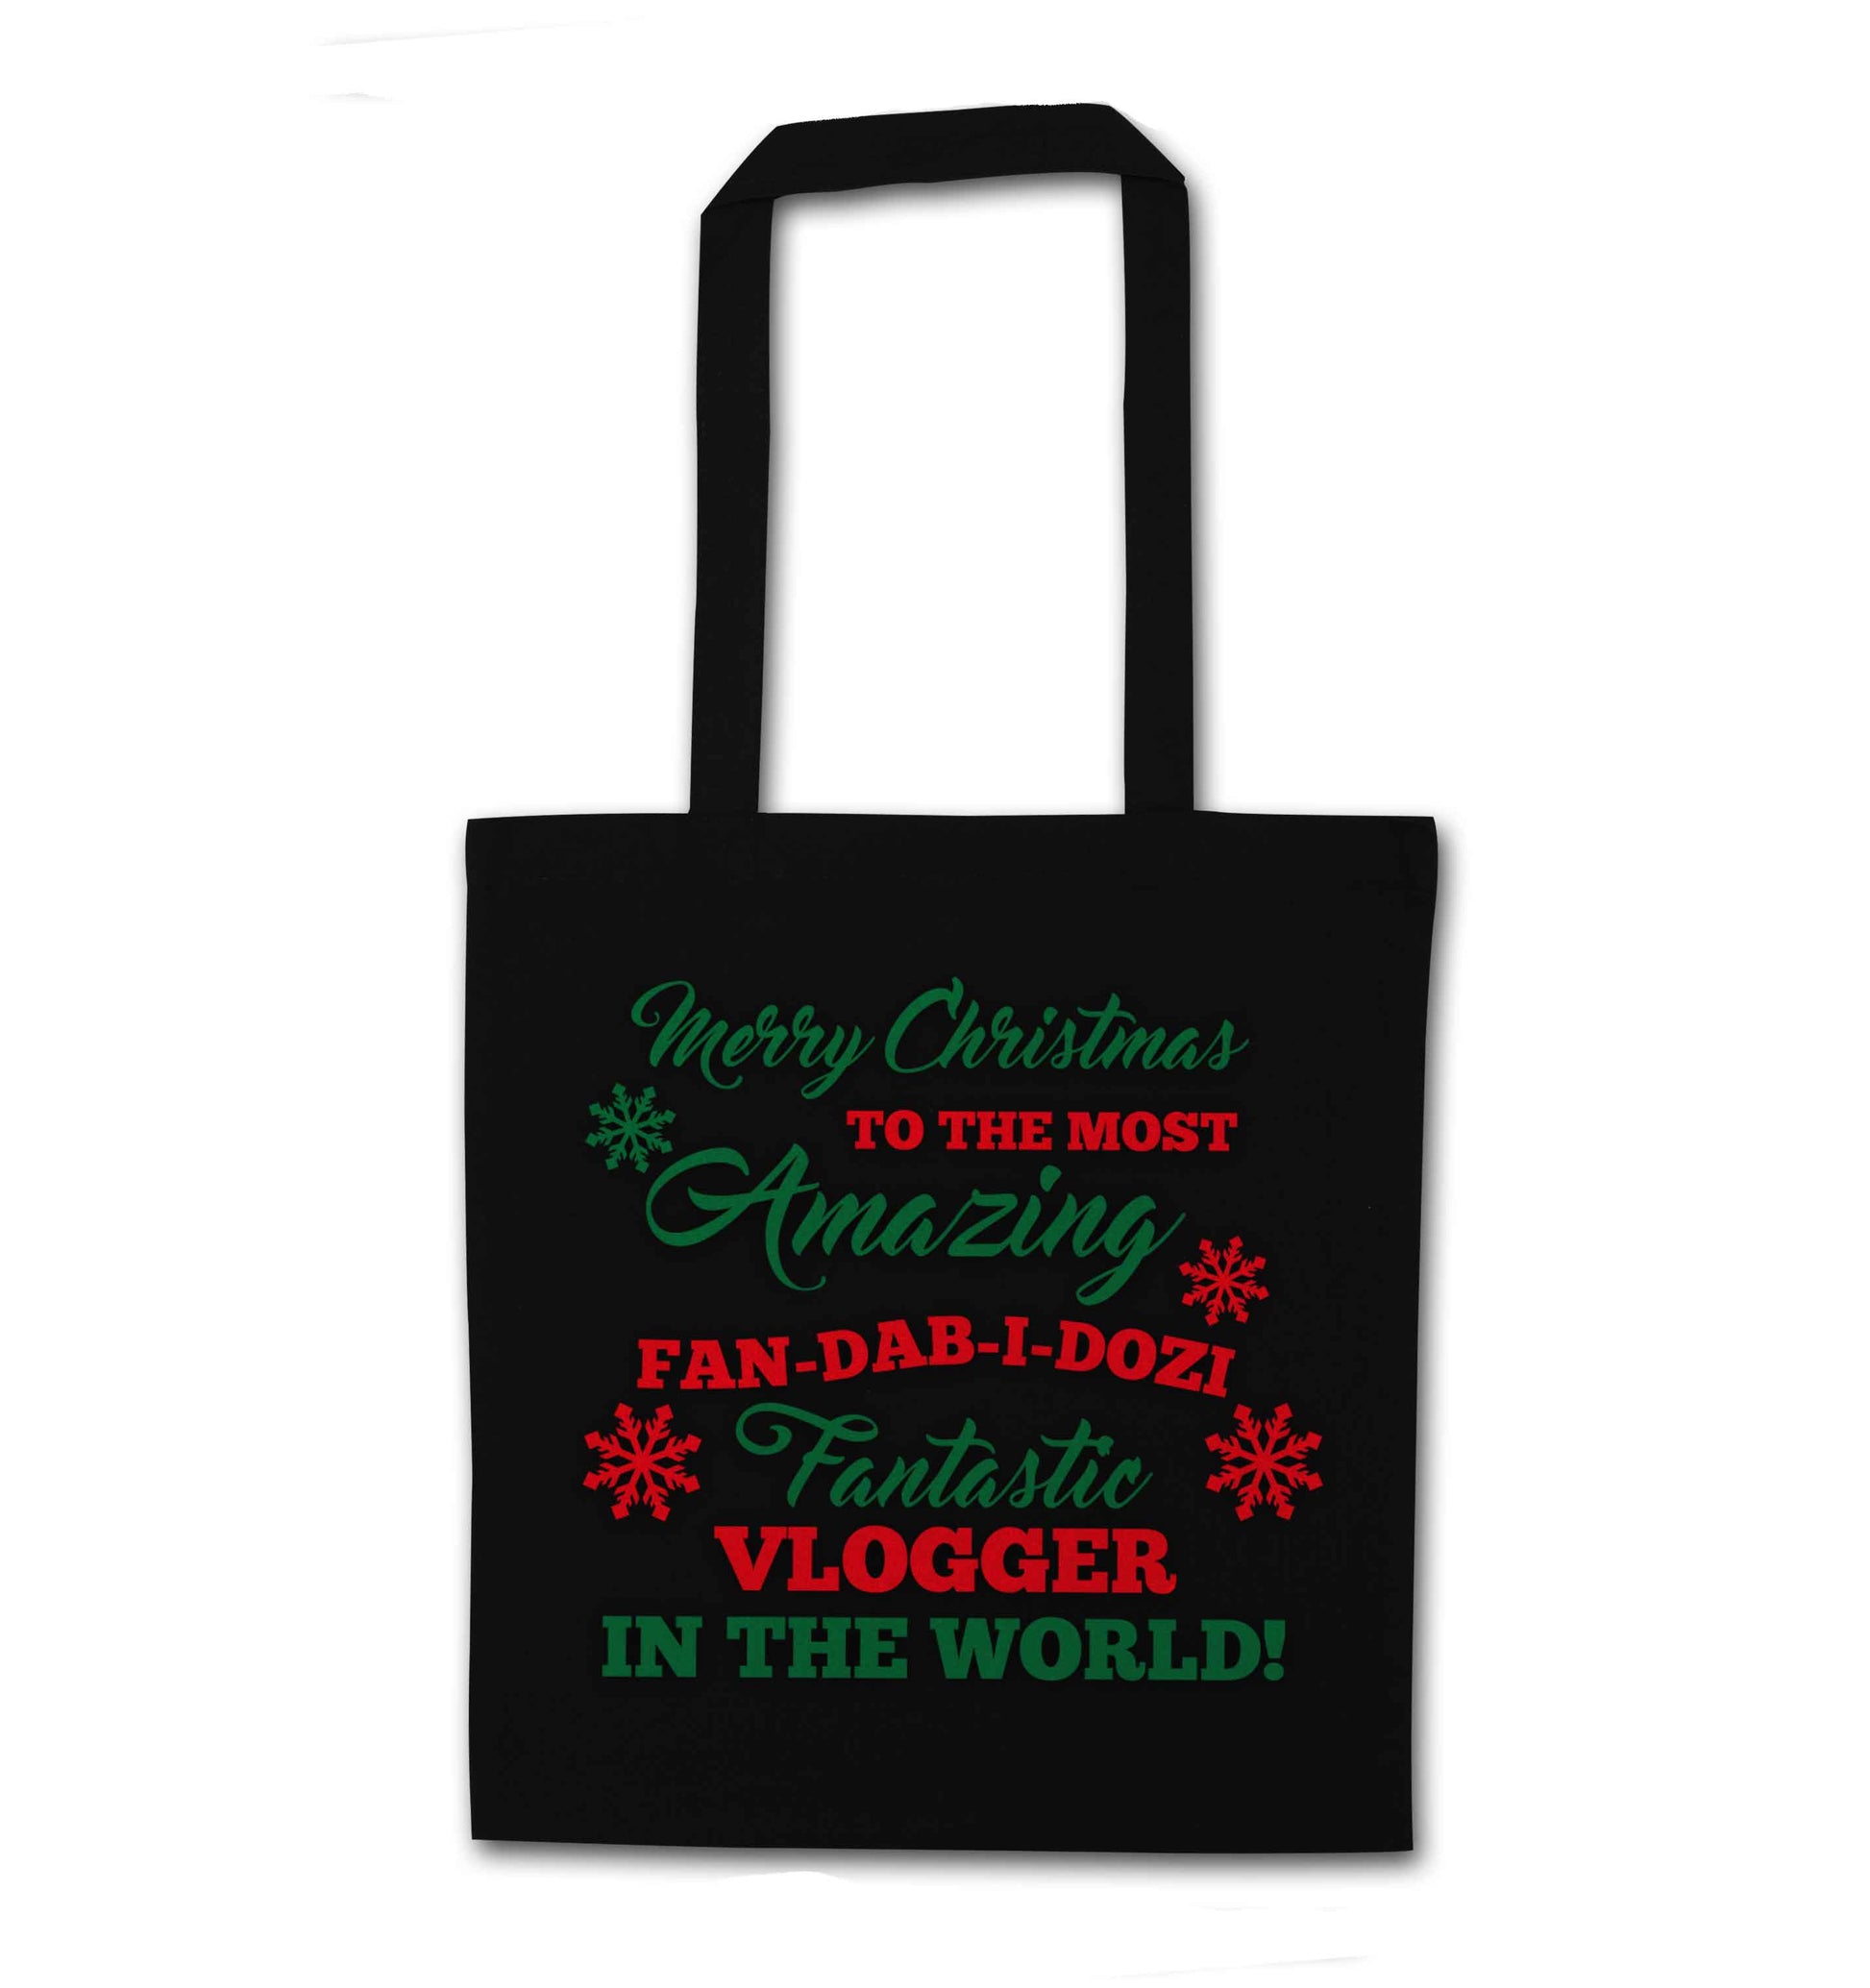 Merry Christmas to the most amazing fan-dab-i-dozi fantasic vlogger in the world black tote bag